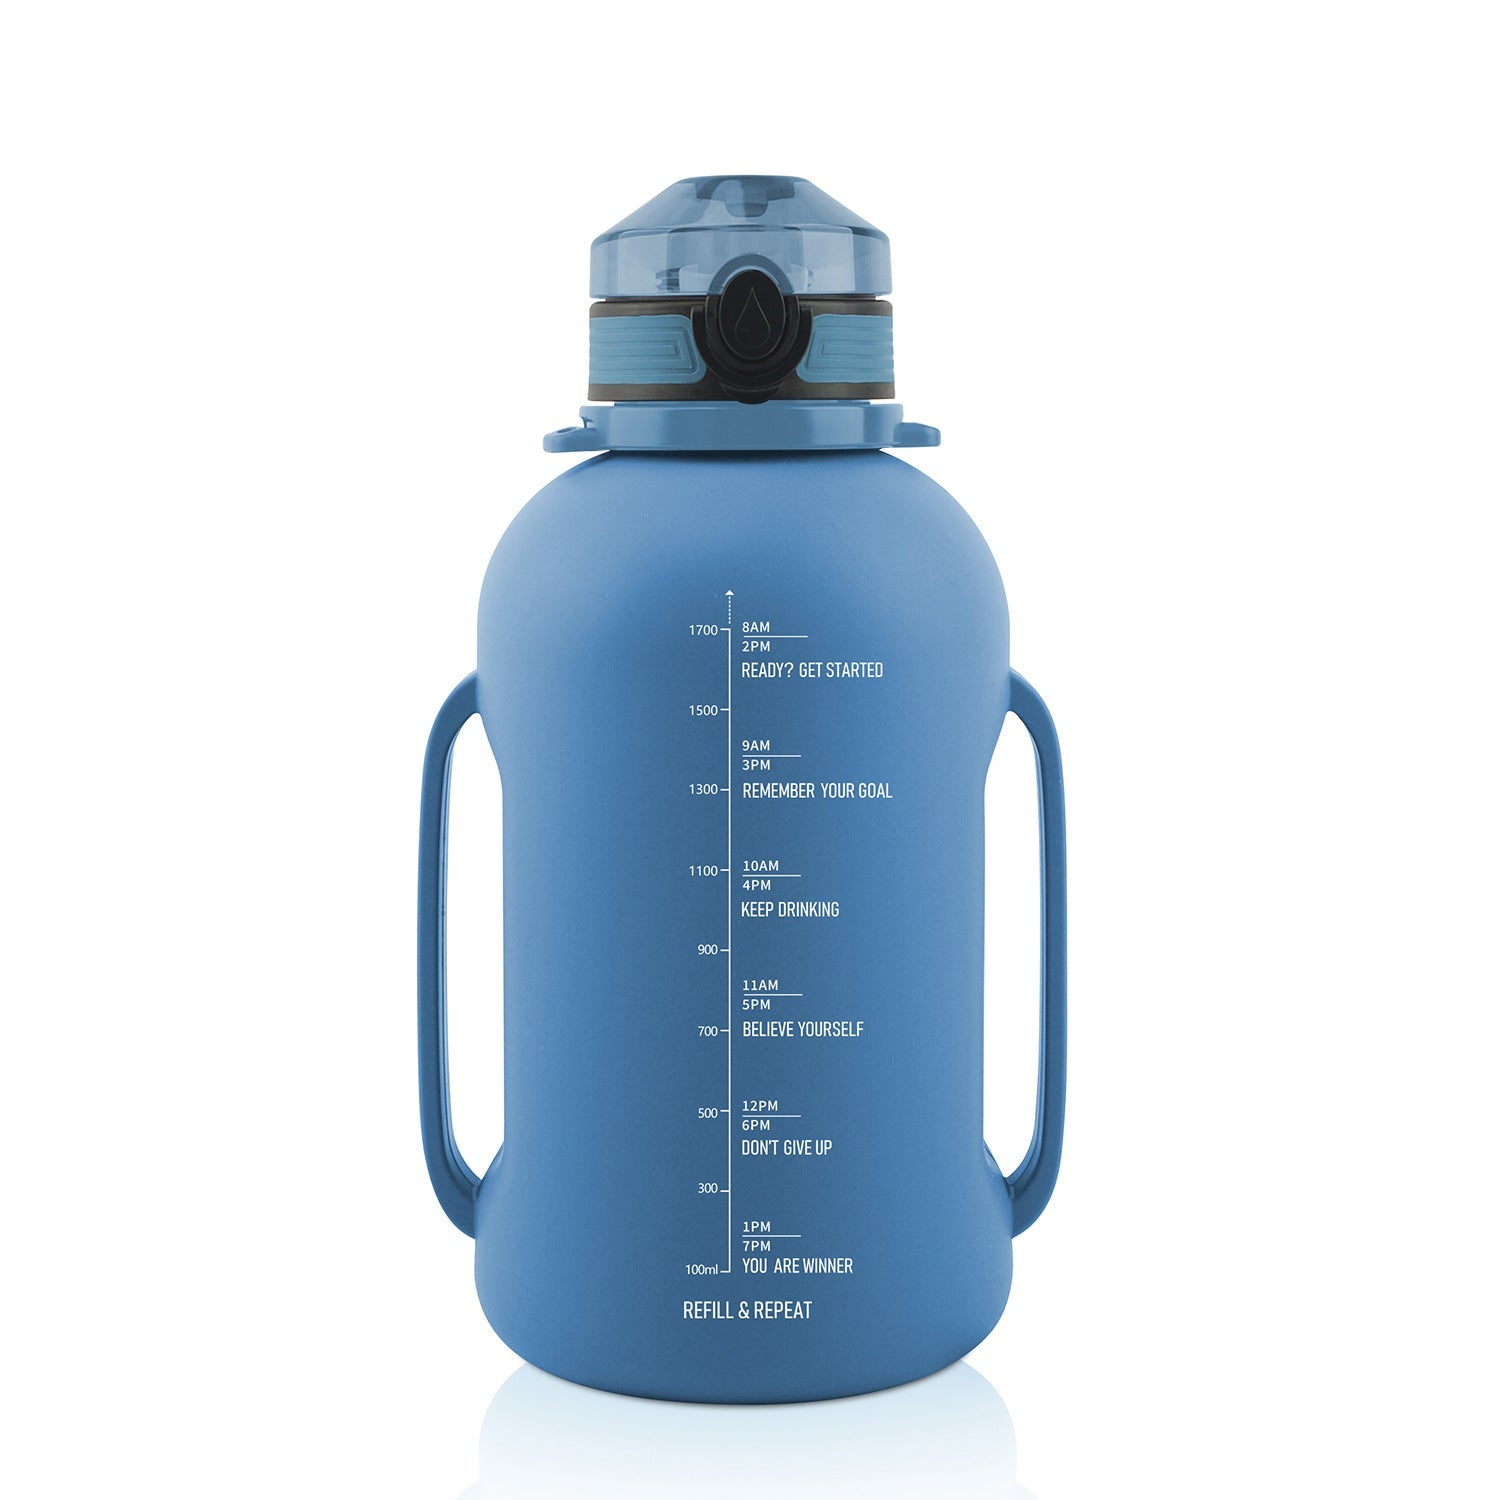 Collapsible Large Capacity Travel Water Bottle